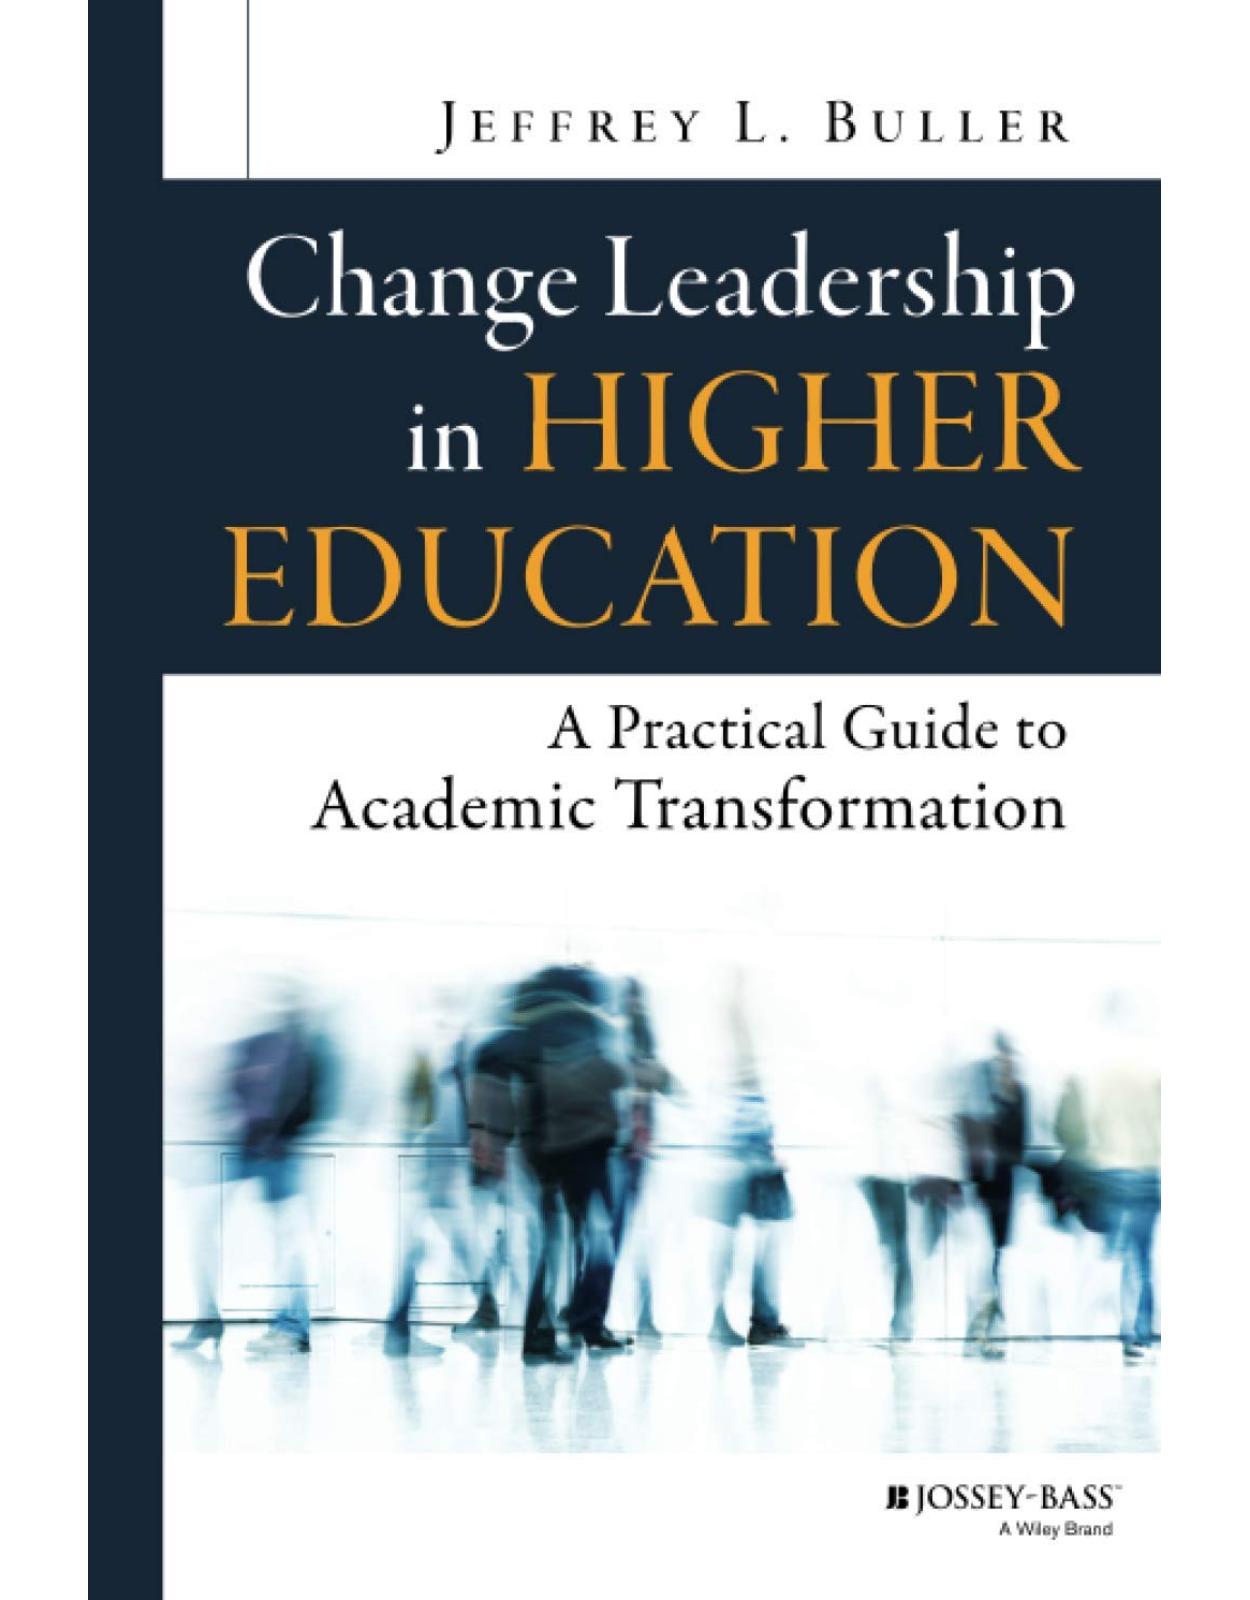 Change Leadership in Higher Education: A Practical Guide to Academic Transformation